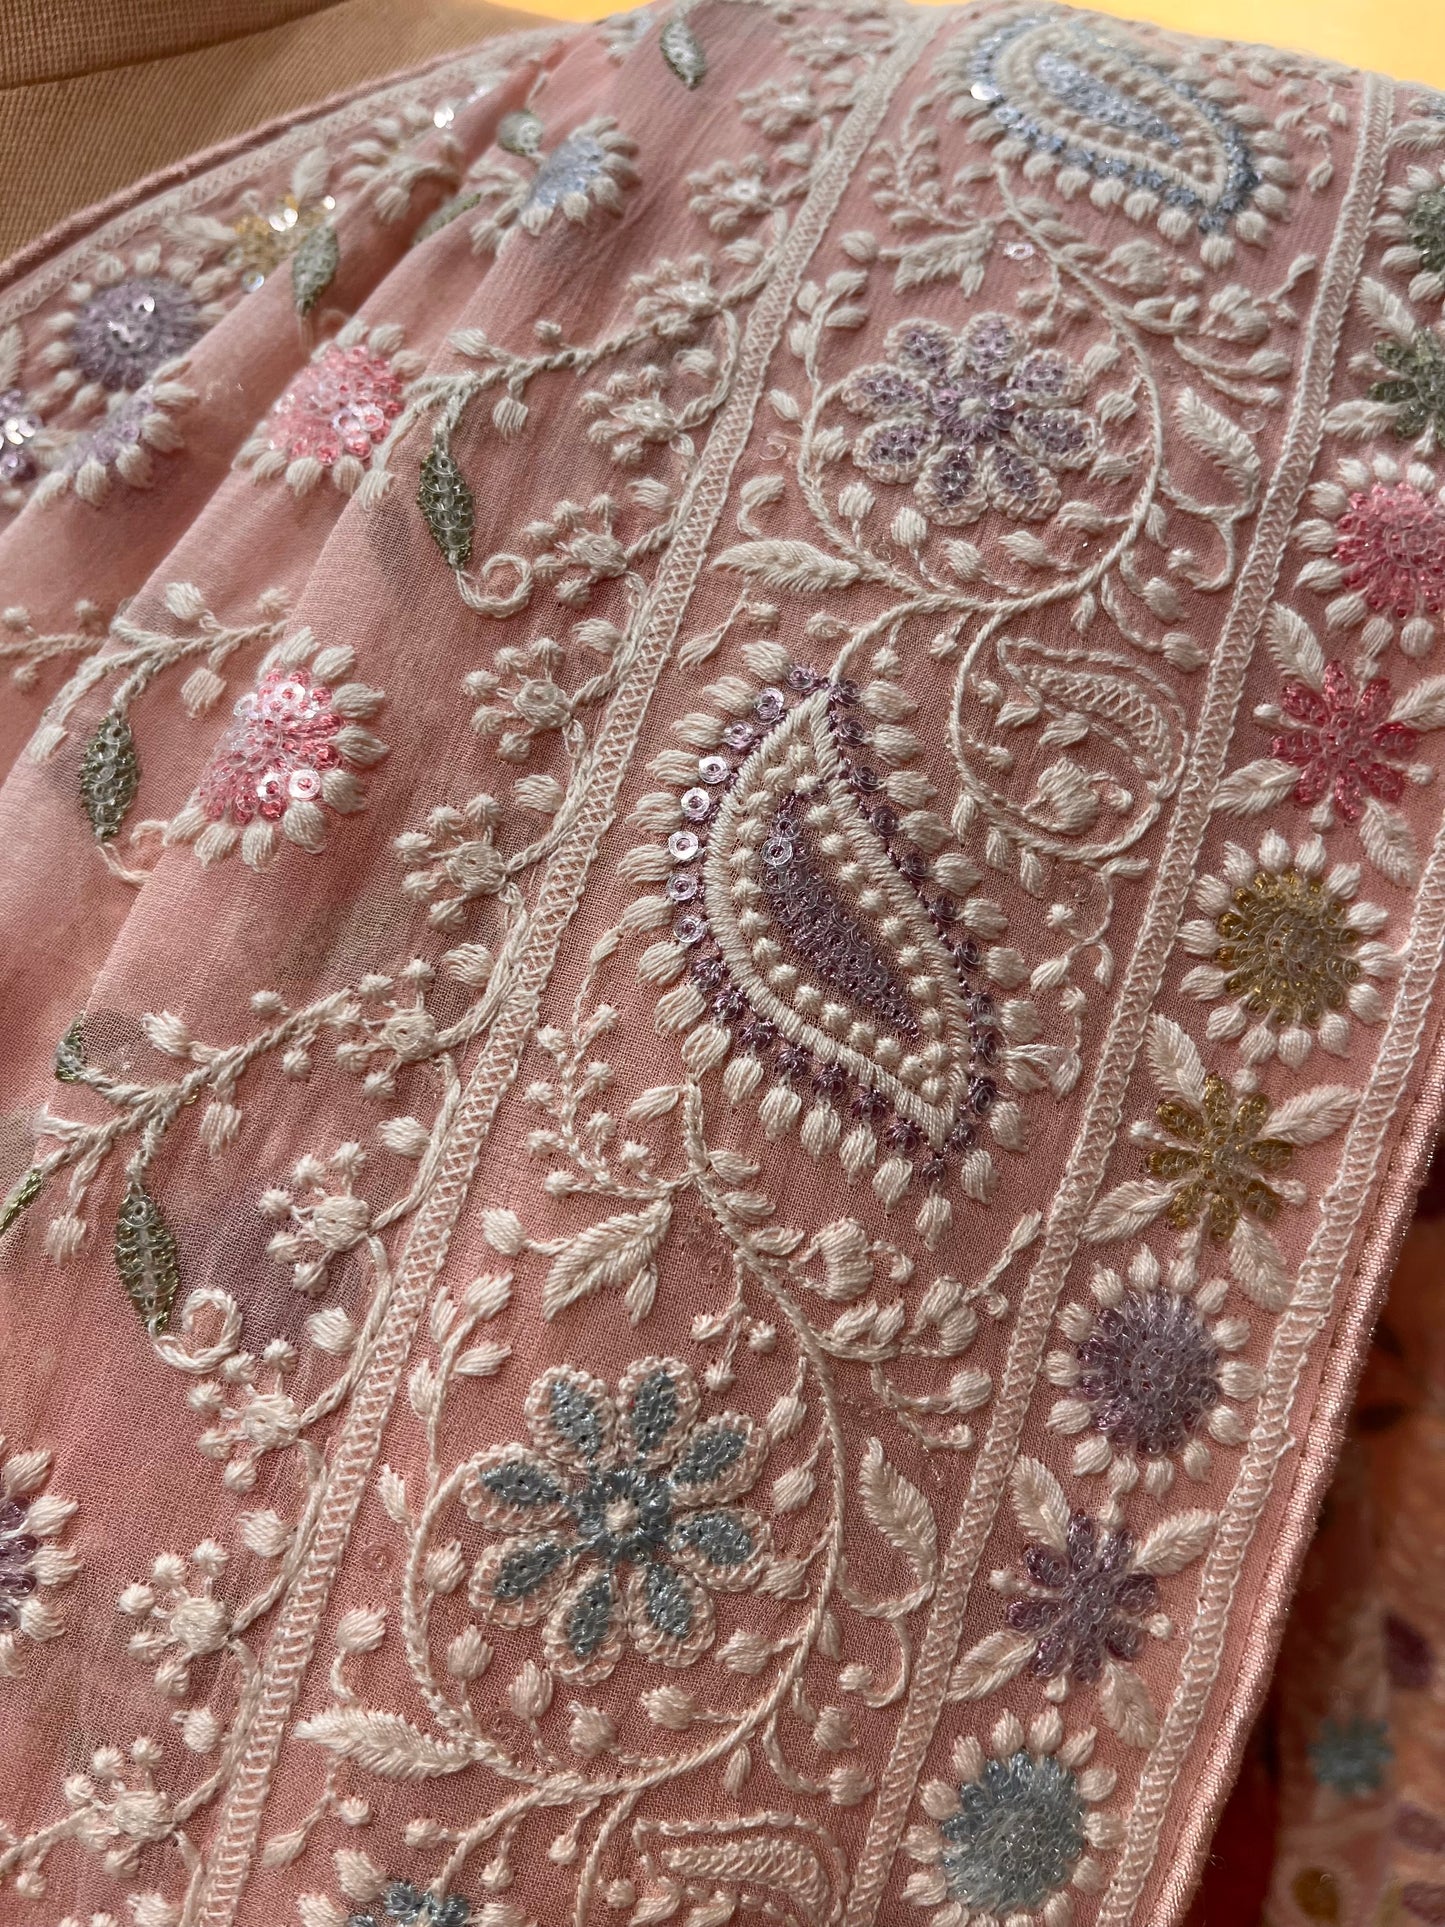 PINK COLOR CHIKANKARI EMBROIDERED SAREE EMBELLISHED WITH SEQUINS & THREAD WORK ( PINK CHIKAN SAREE )